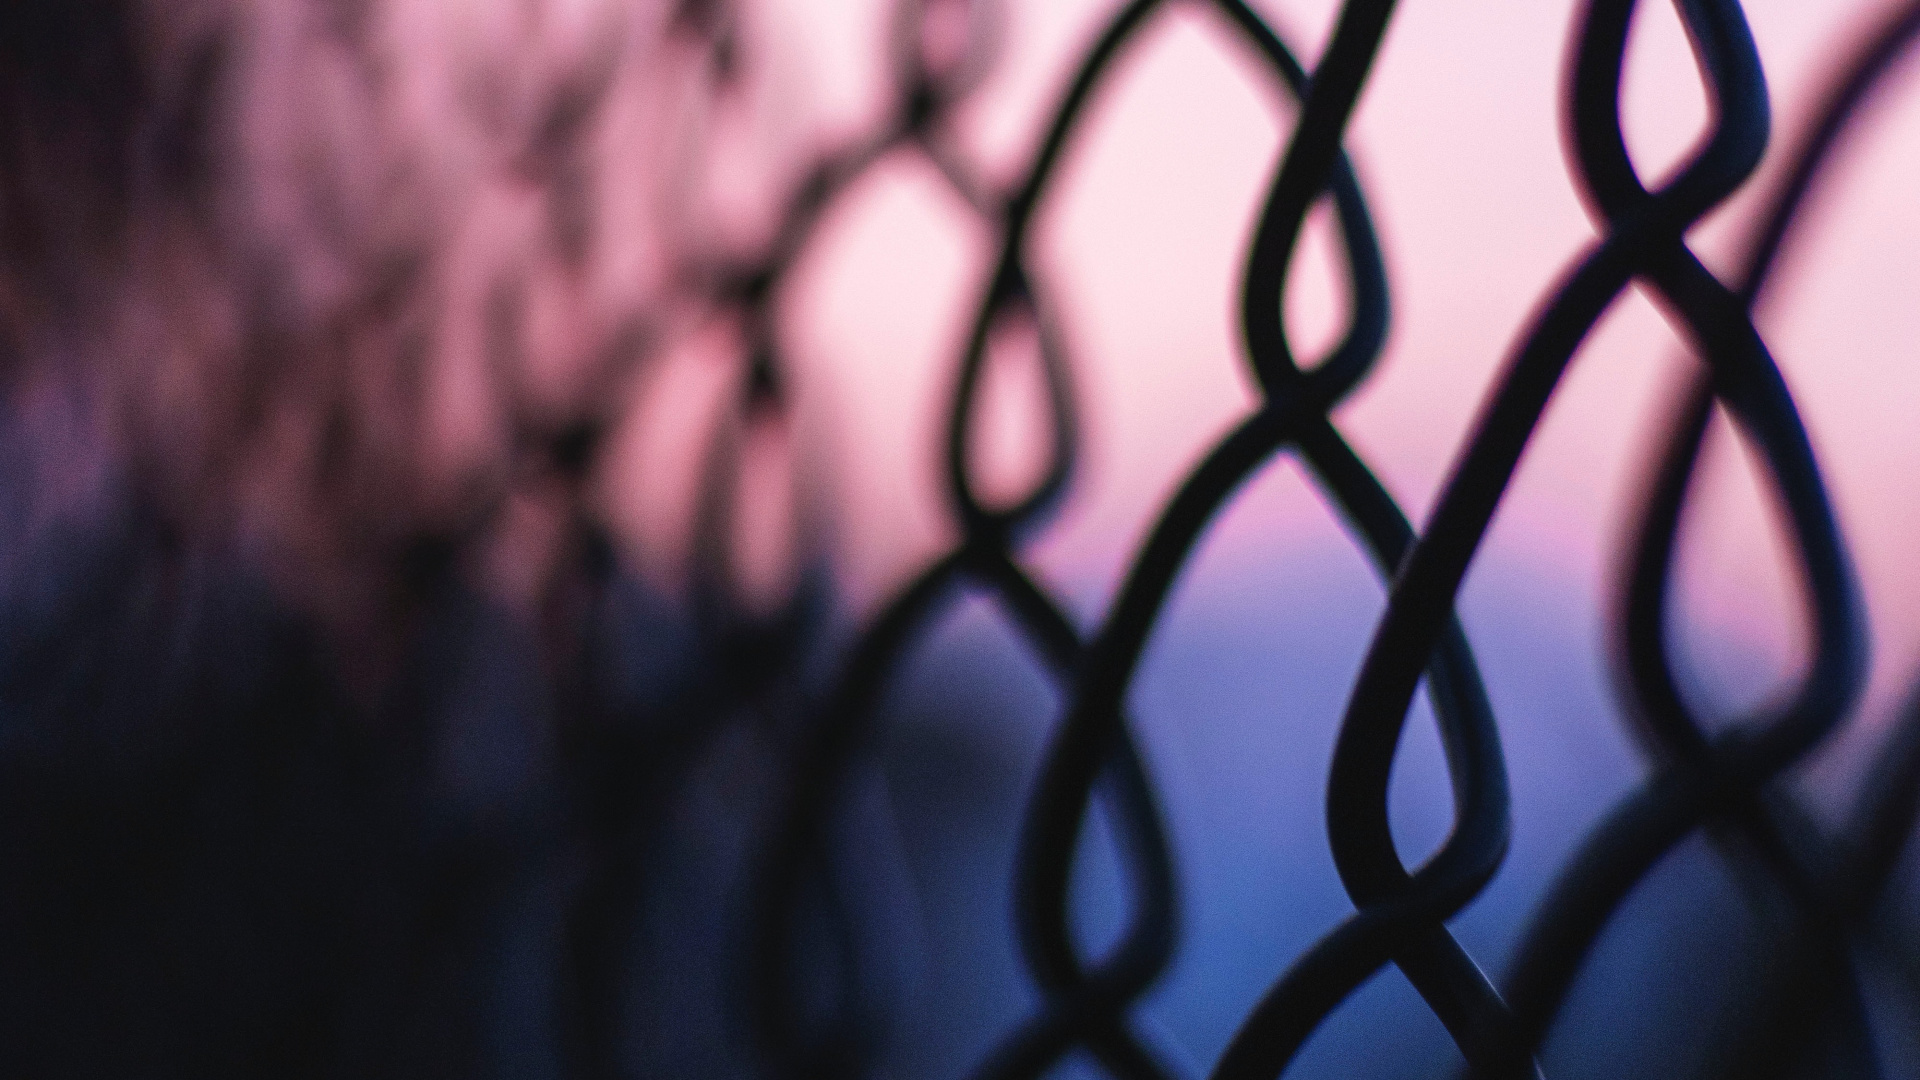 Grey Metal Fence During Daytime. Wallpaper in 1920x1080 Resolution